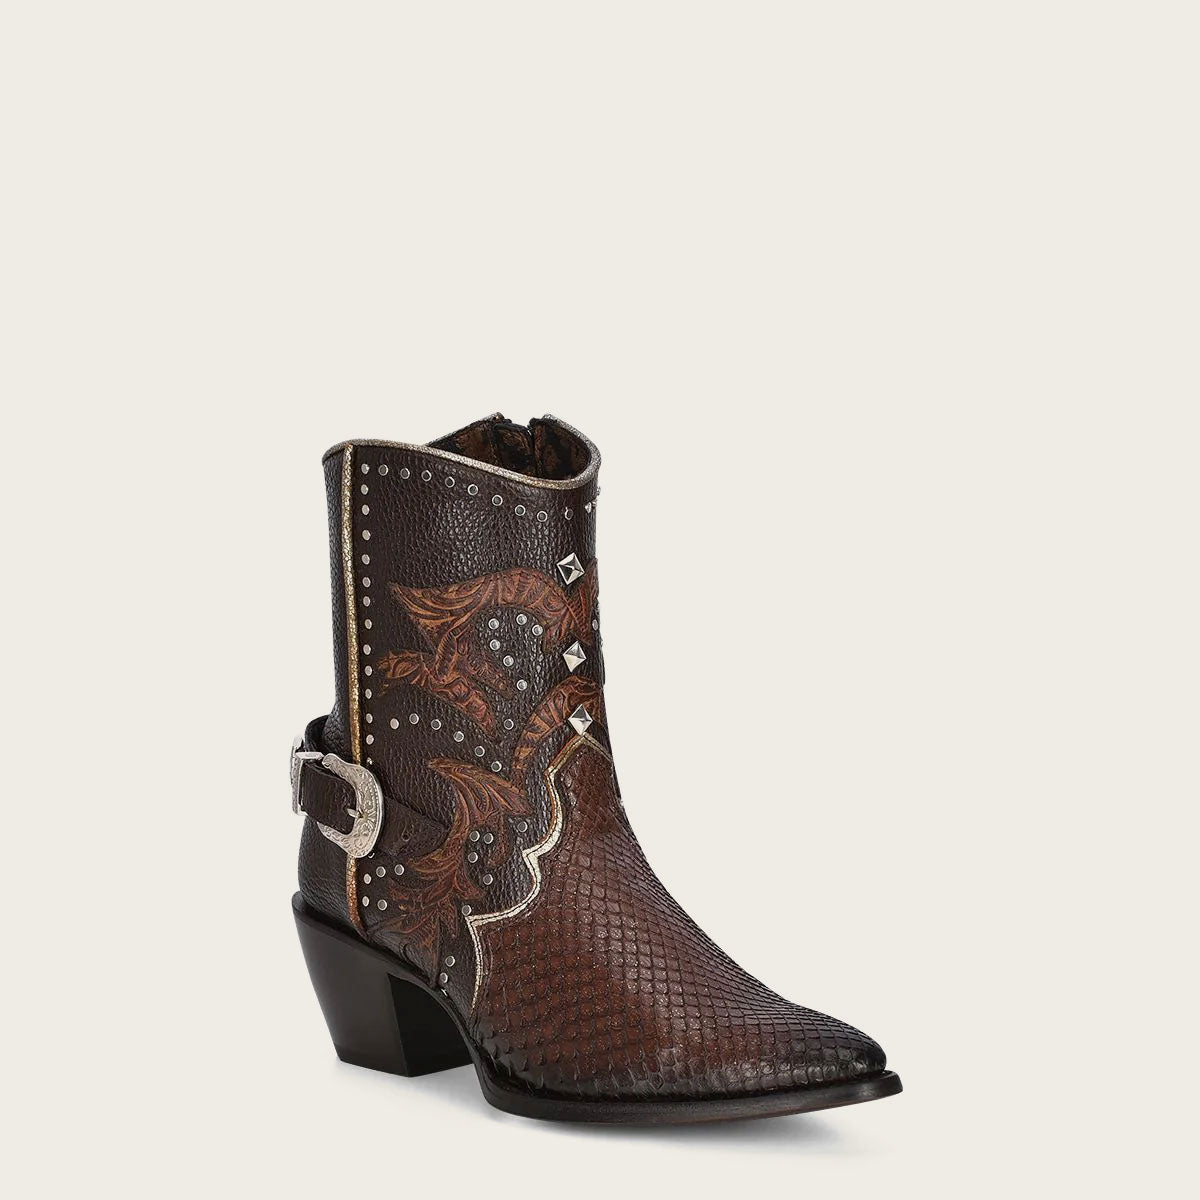 Brown western exotic leather bootie - elevate your Western style with these exquisite booties made from premium quality leather. Unique texture and pattern make them stand out, with classic design and modern detailing perfect for any occasion.